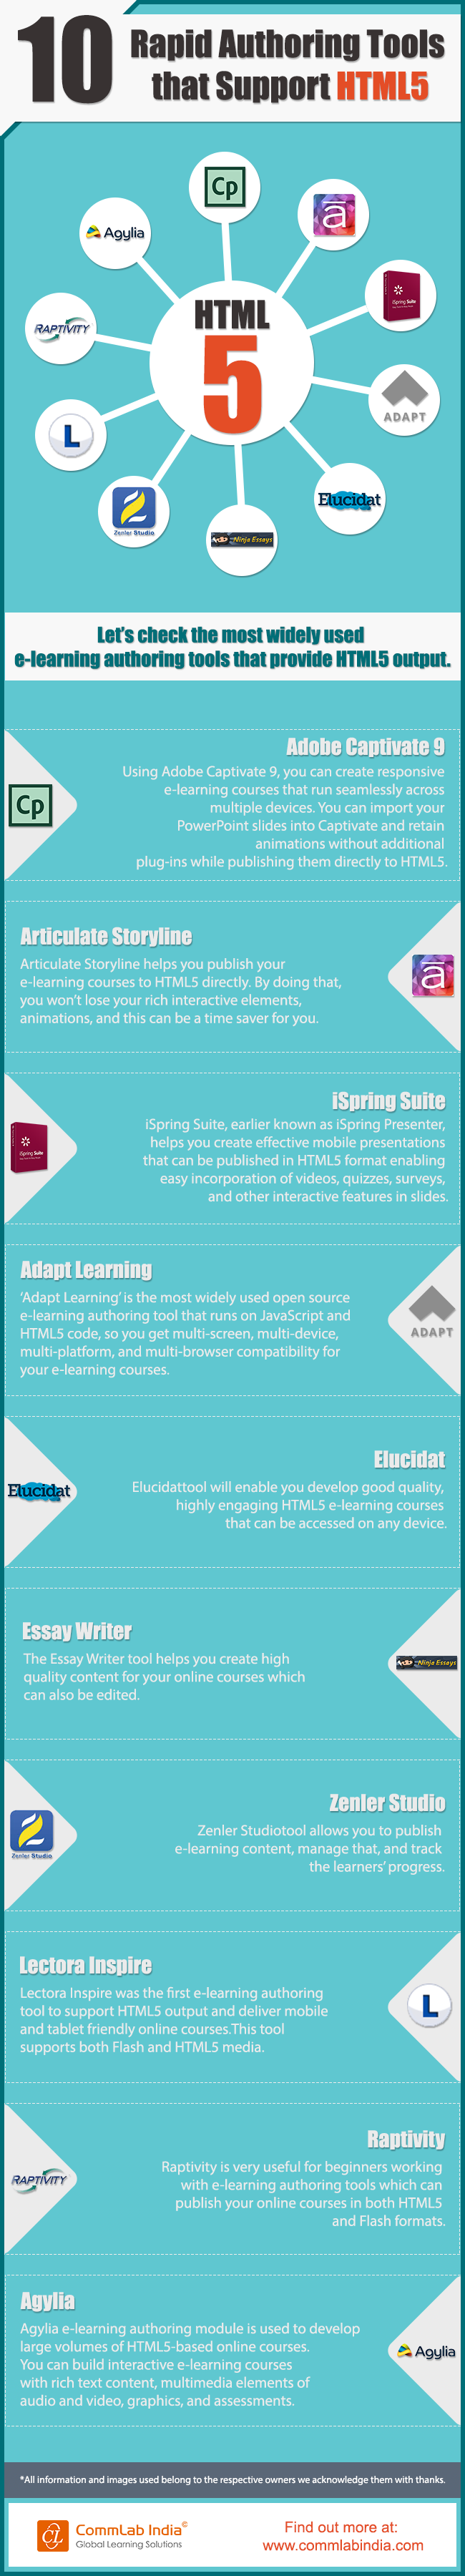 10 Rapid Authoring Tools that Support HTML5 [Infographic]